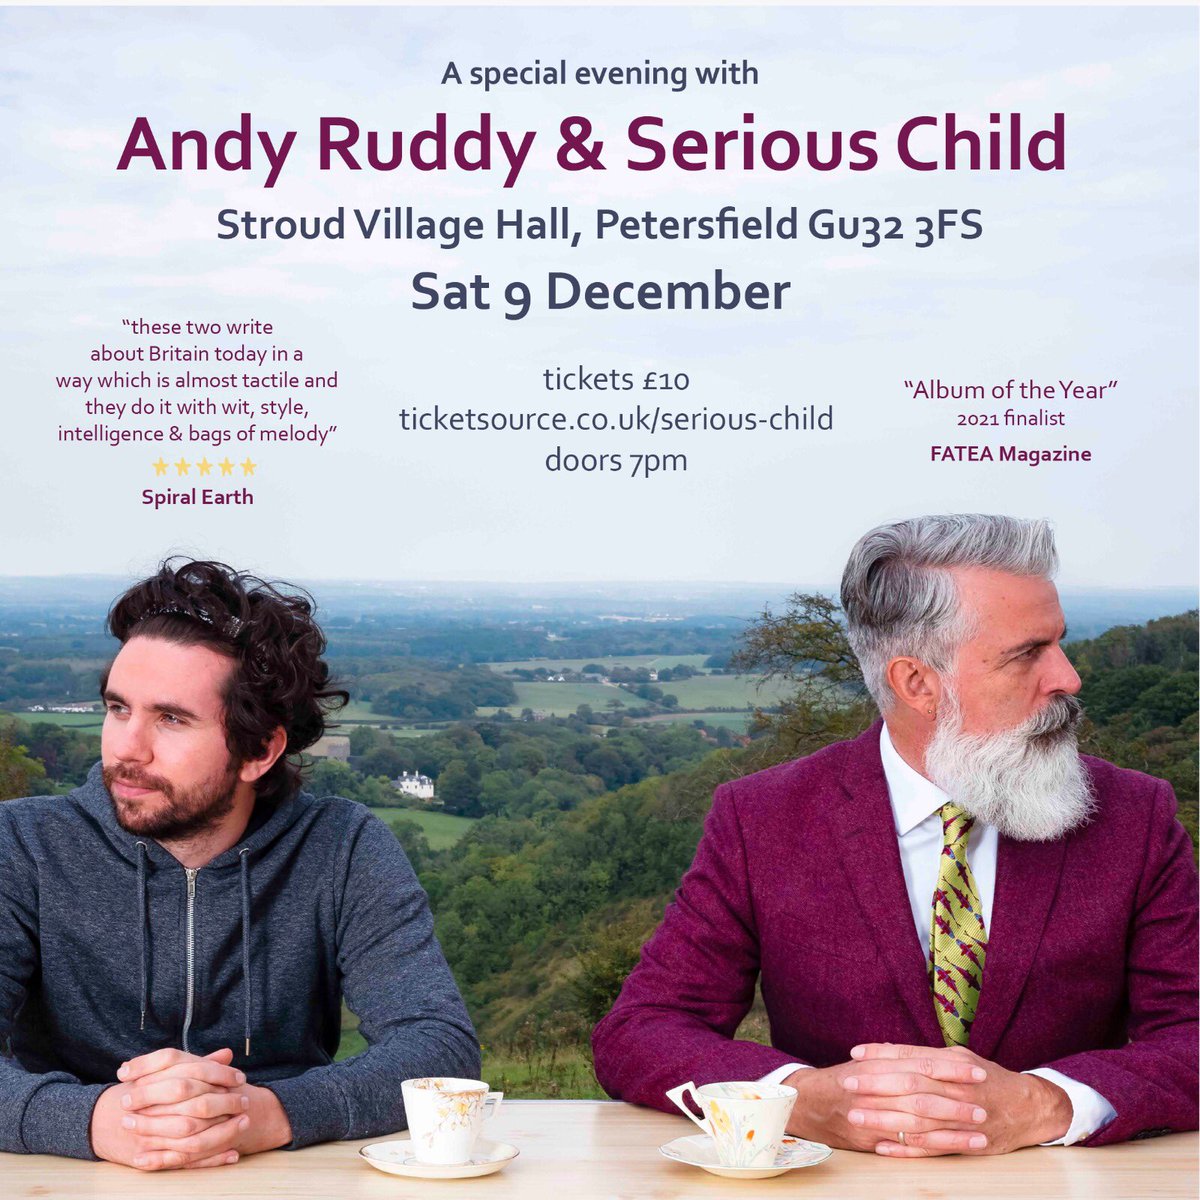 Tickets are selling fast for my gig with @ChildSerious in Petersfield on the 9th of December. Can't wait to share songs, old and new! Going to be a really special night! Ticket link: ticketsource.co.uk/serious-child/…